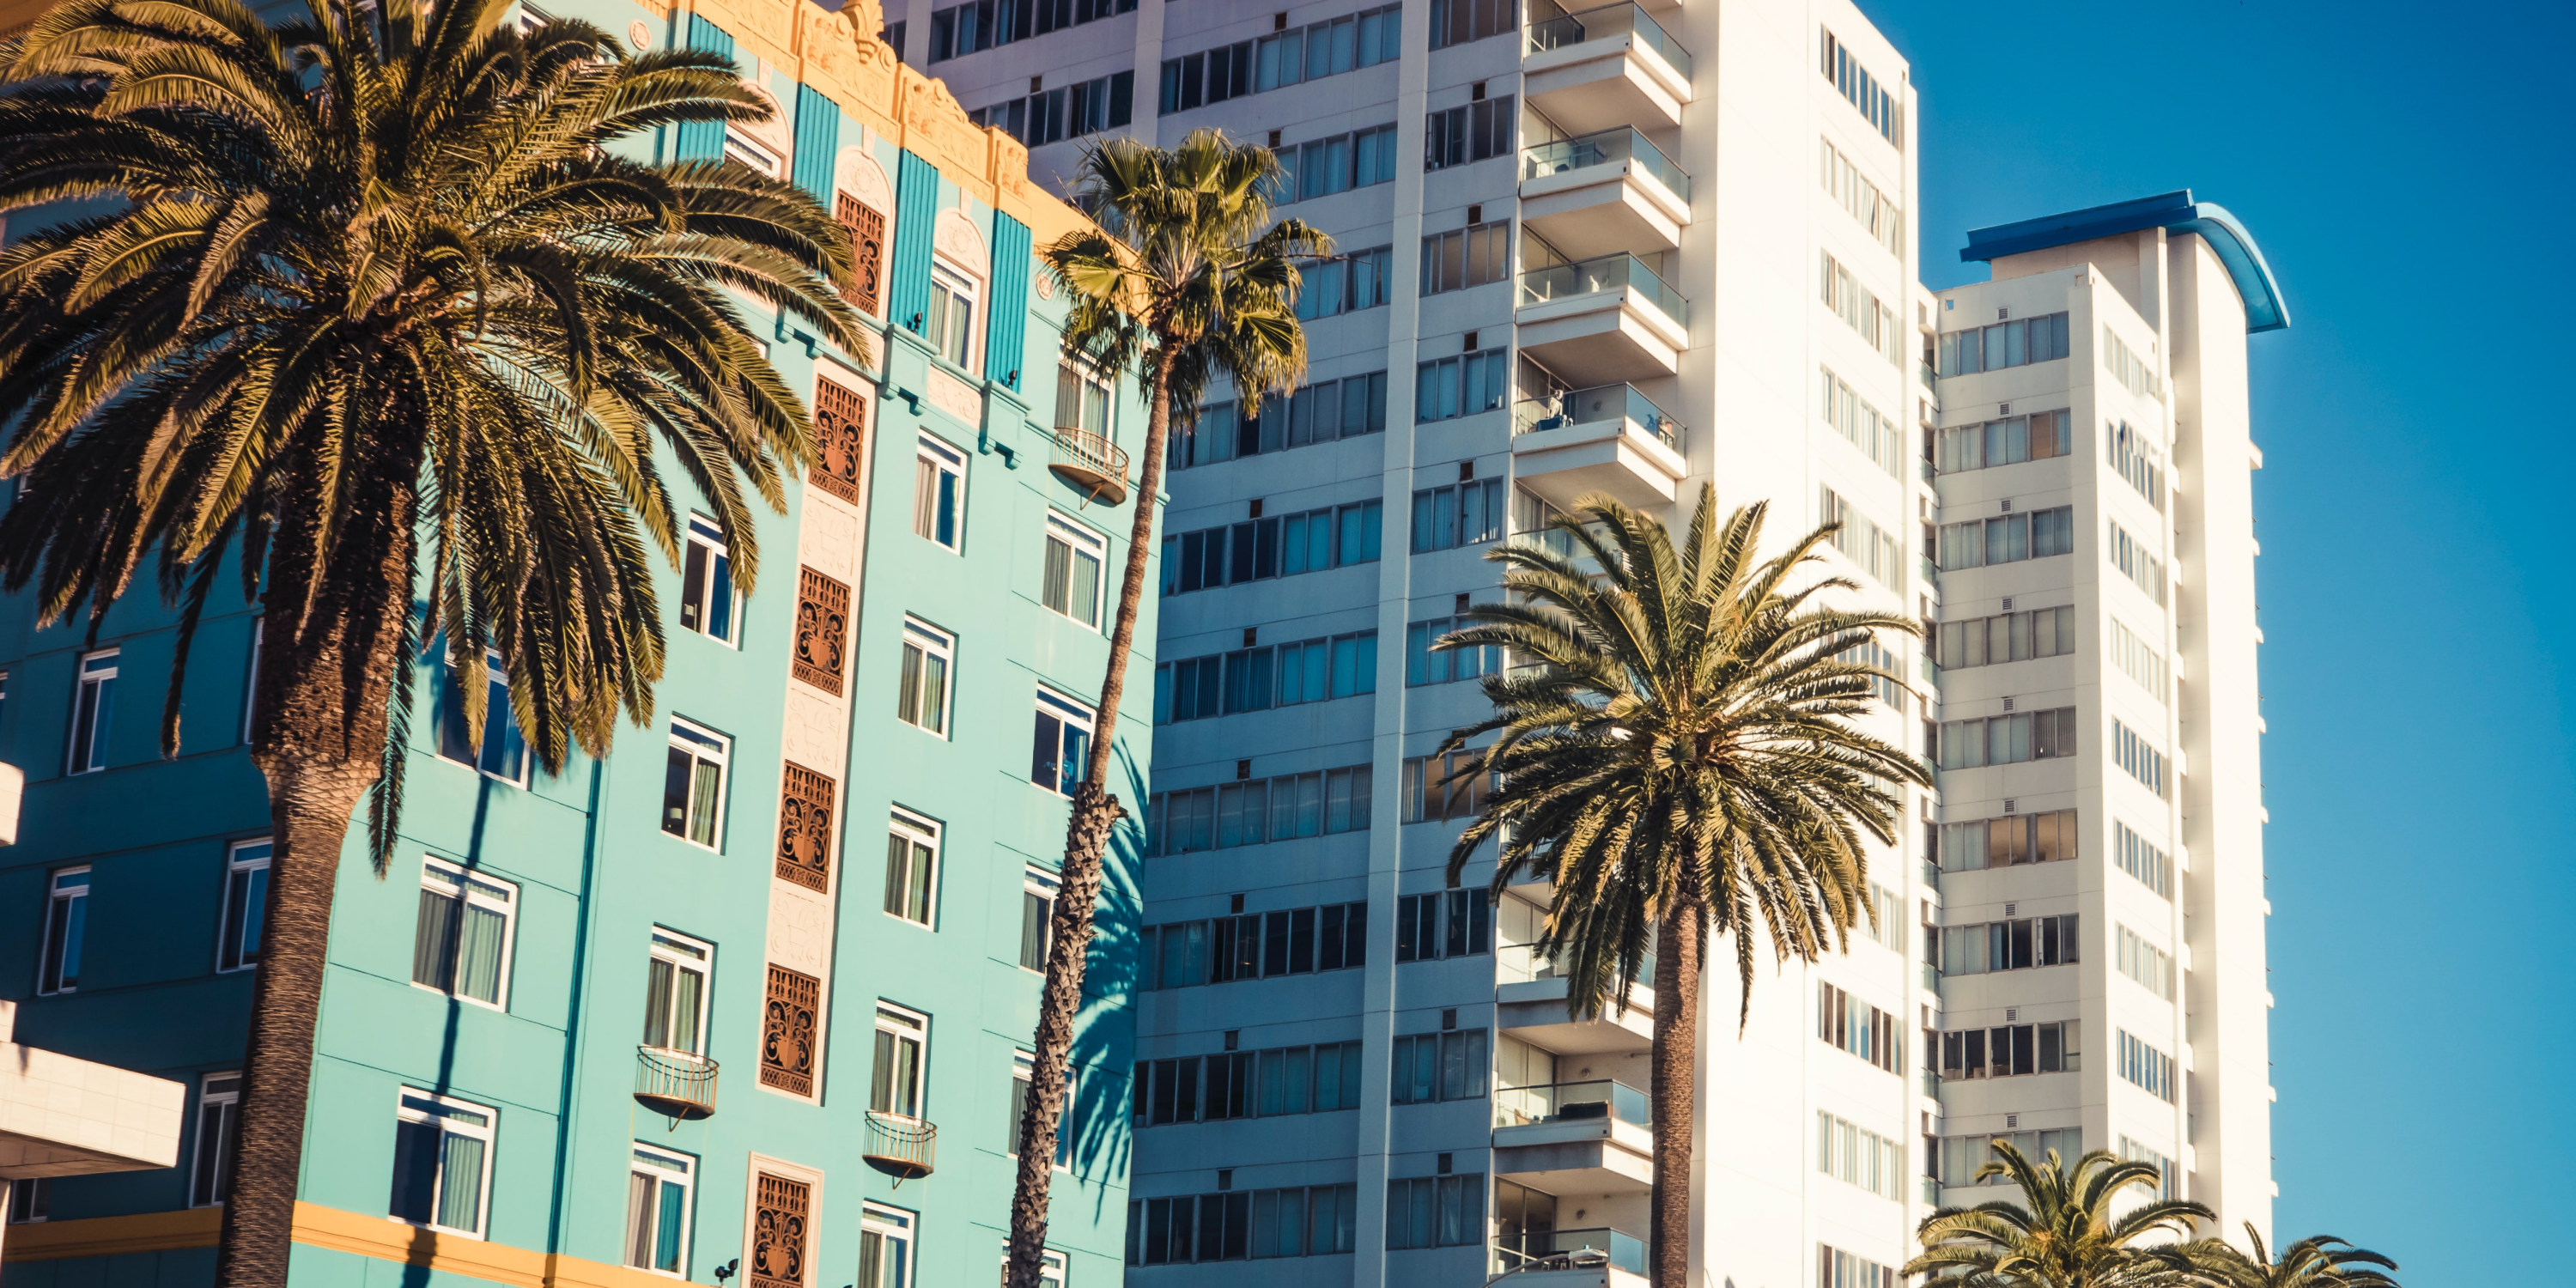 An image of a blue and white apartment building and palm trees in California